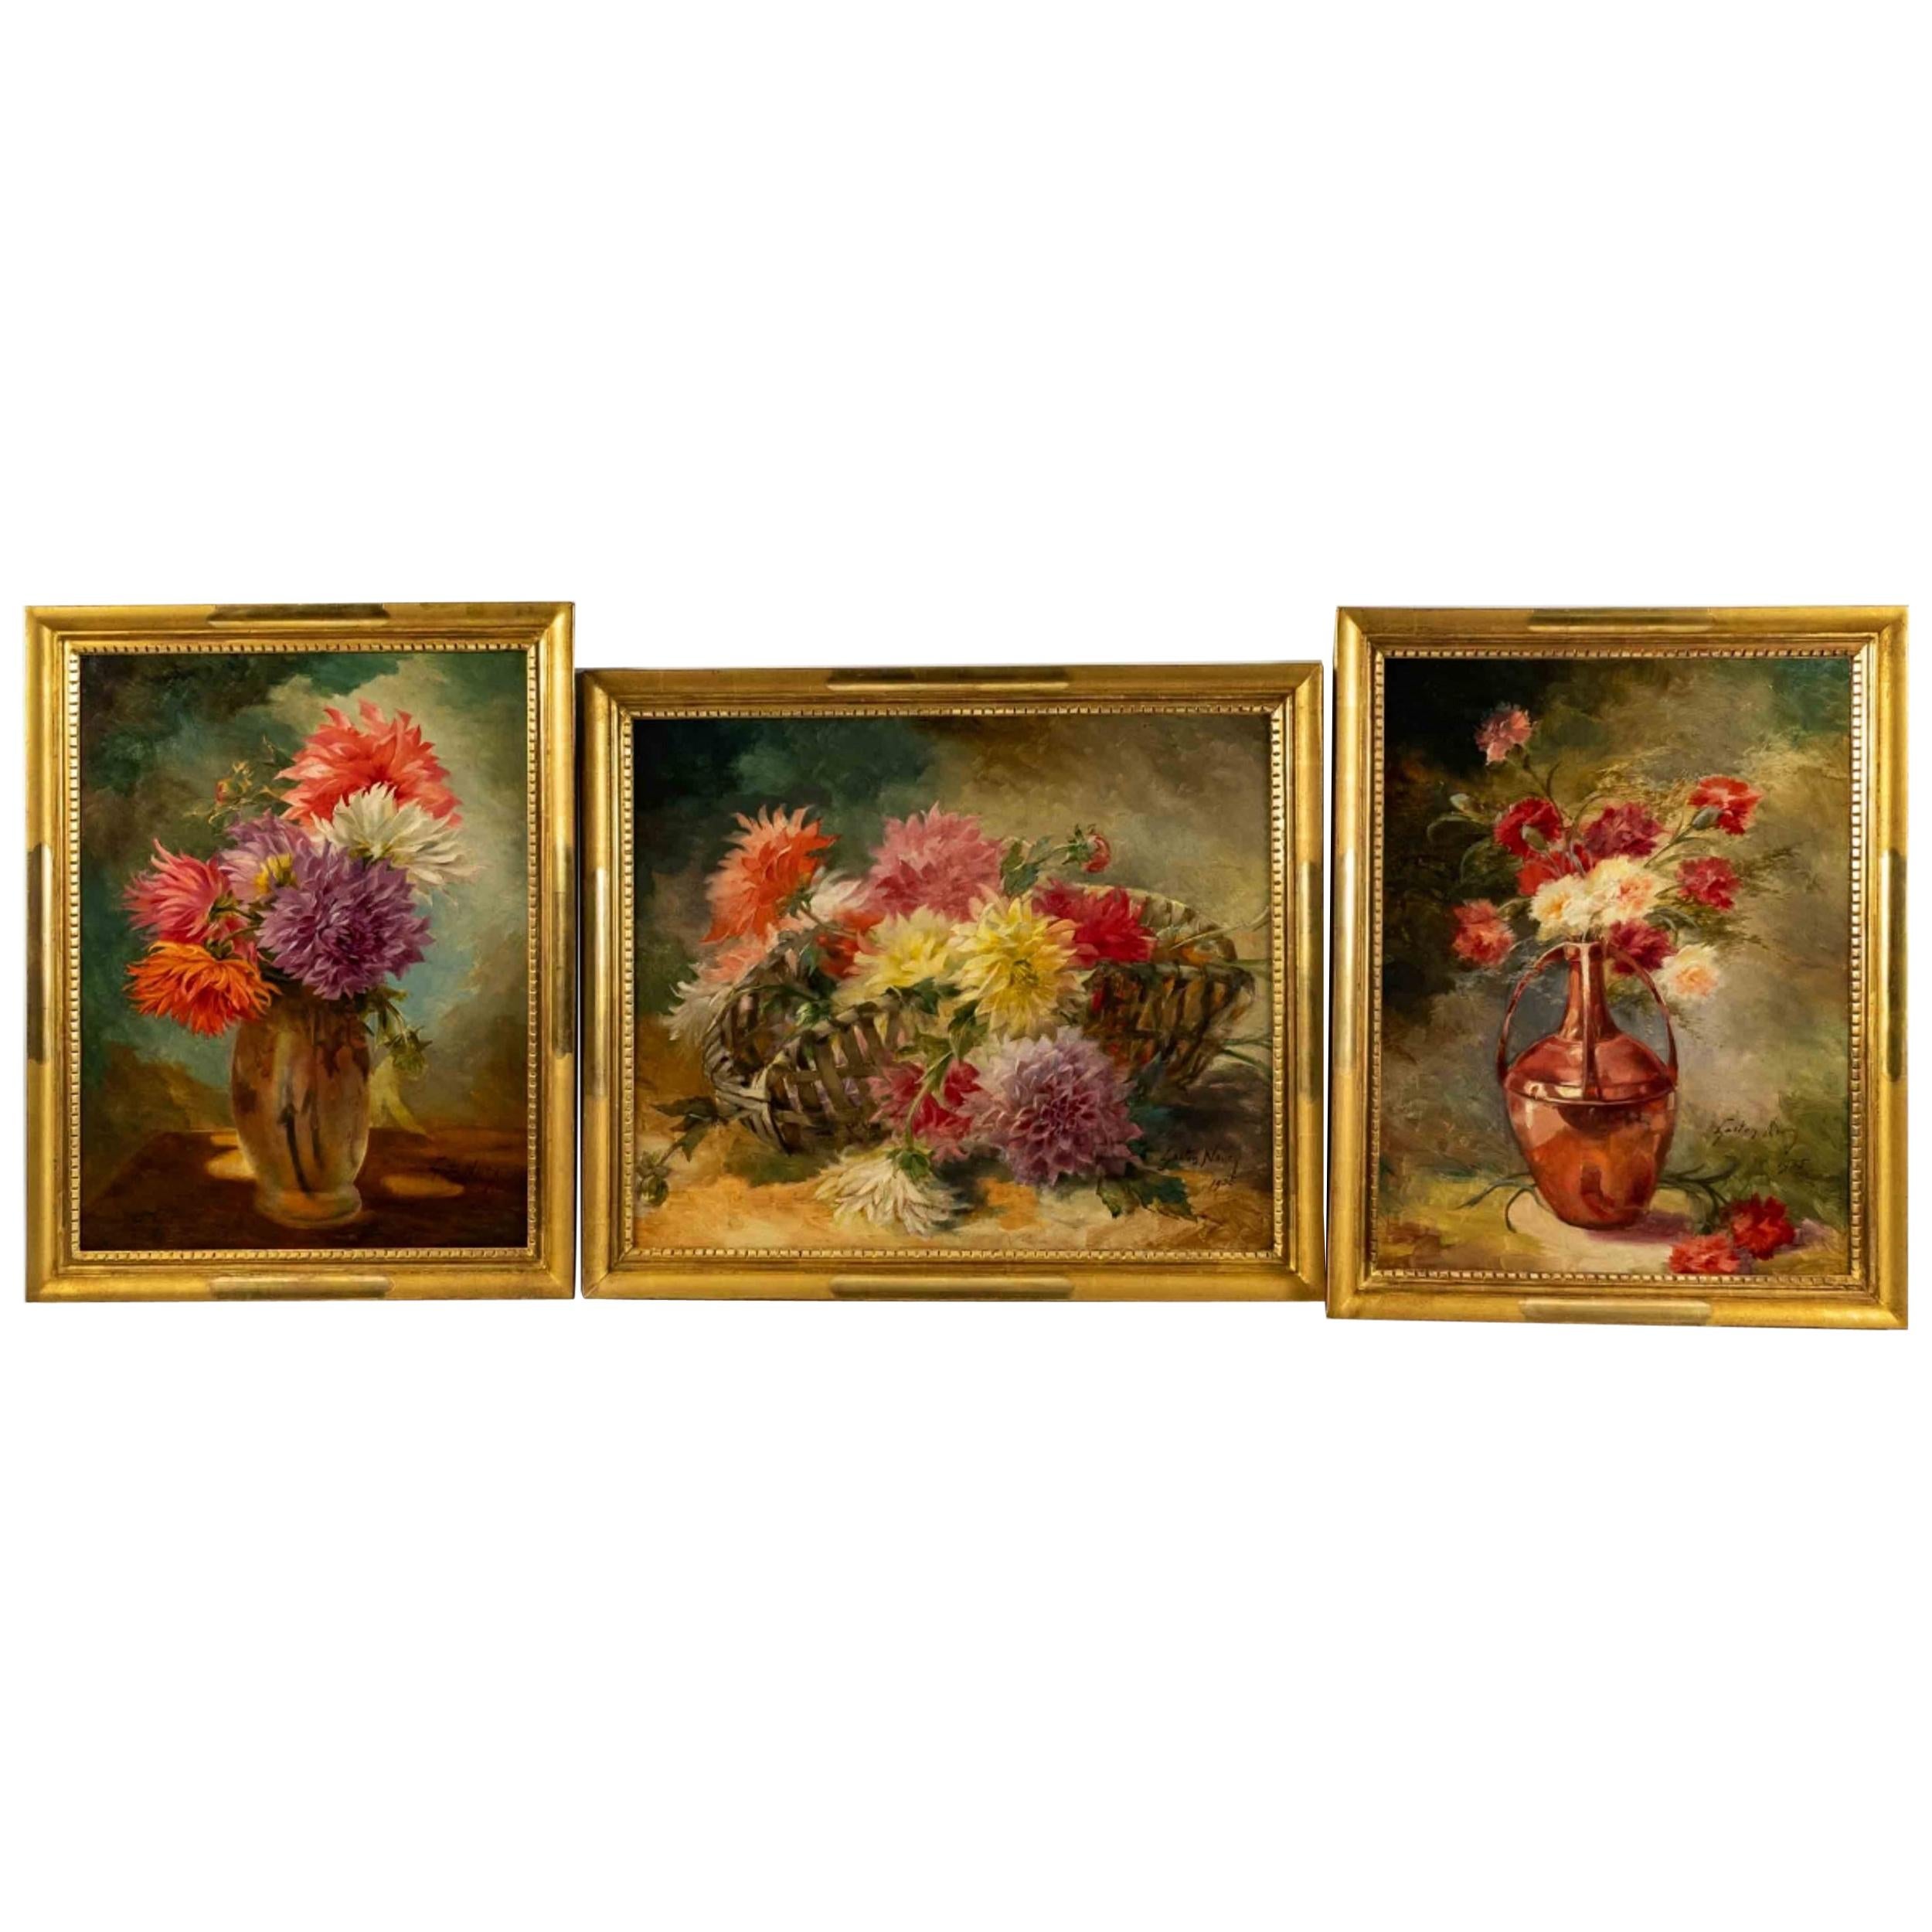 Triptych of Oil on Canvas Representing Still Lifes by Gaston Noury